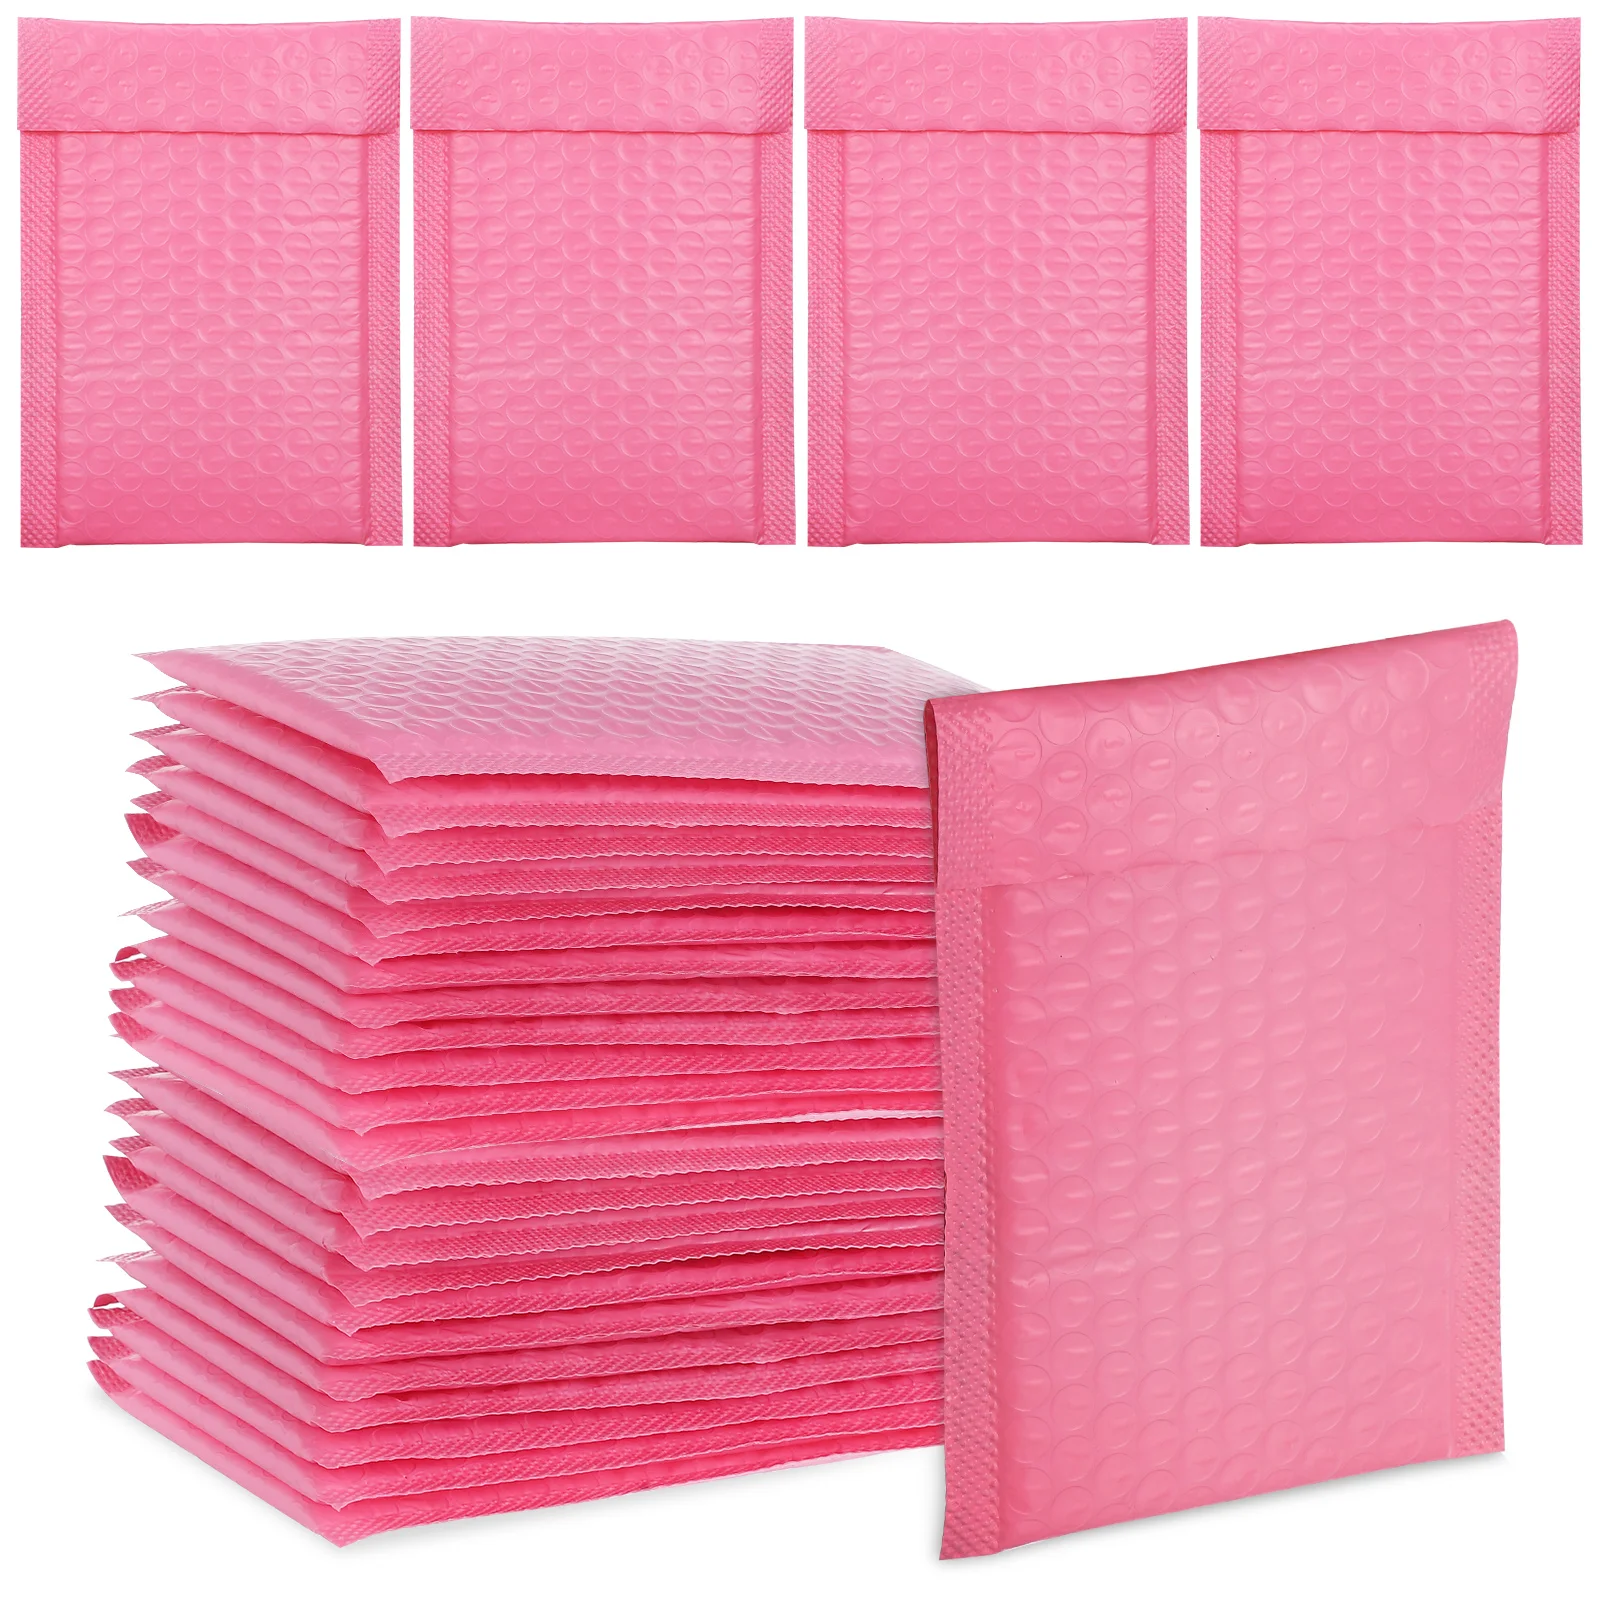 

30 Pcs Thank You Small Business Self-sealing Mailer Bag Mailers Packaging Envelopes For Small Business Liner